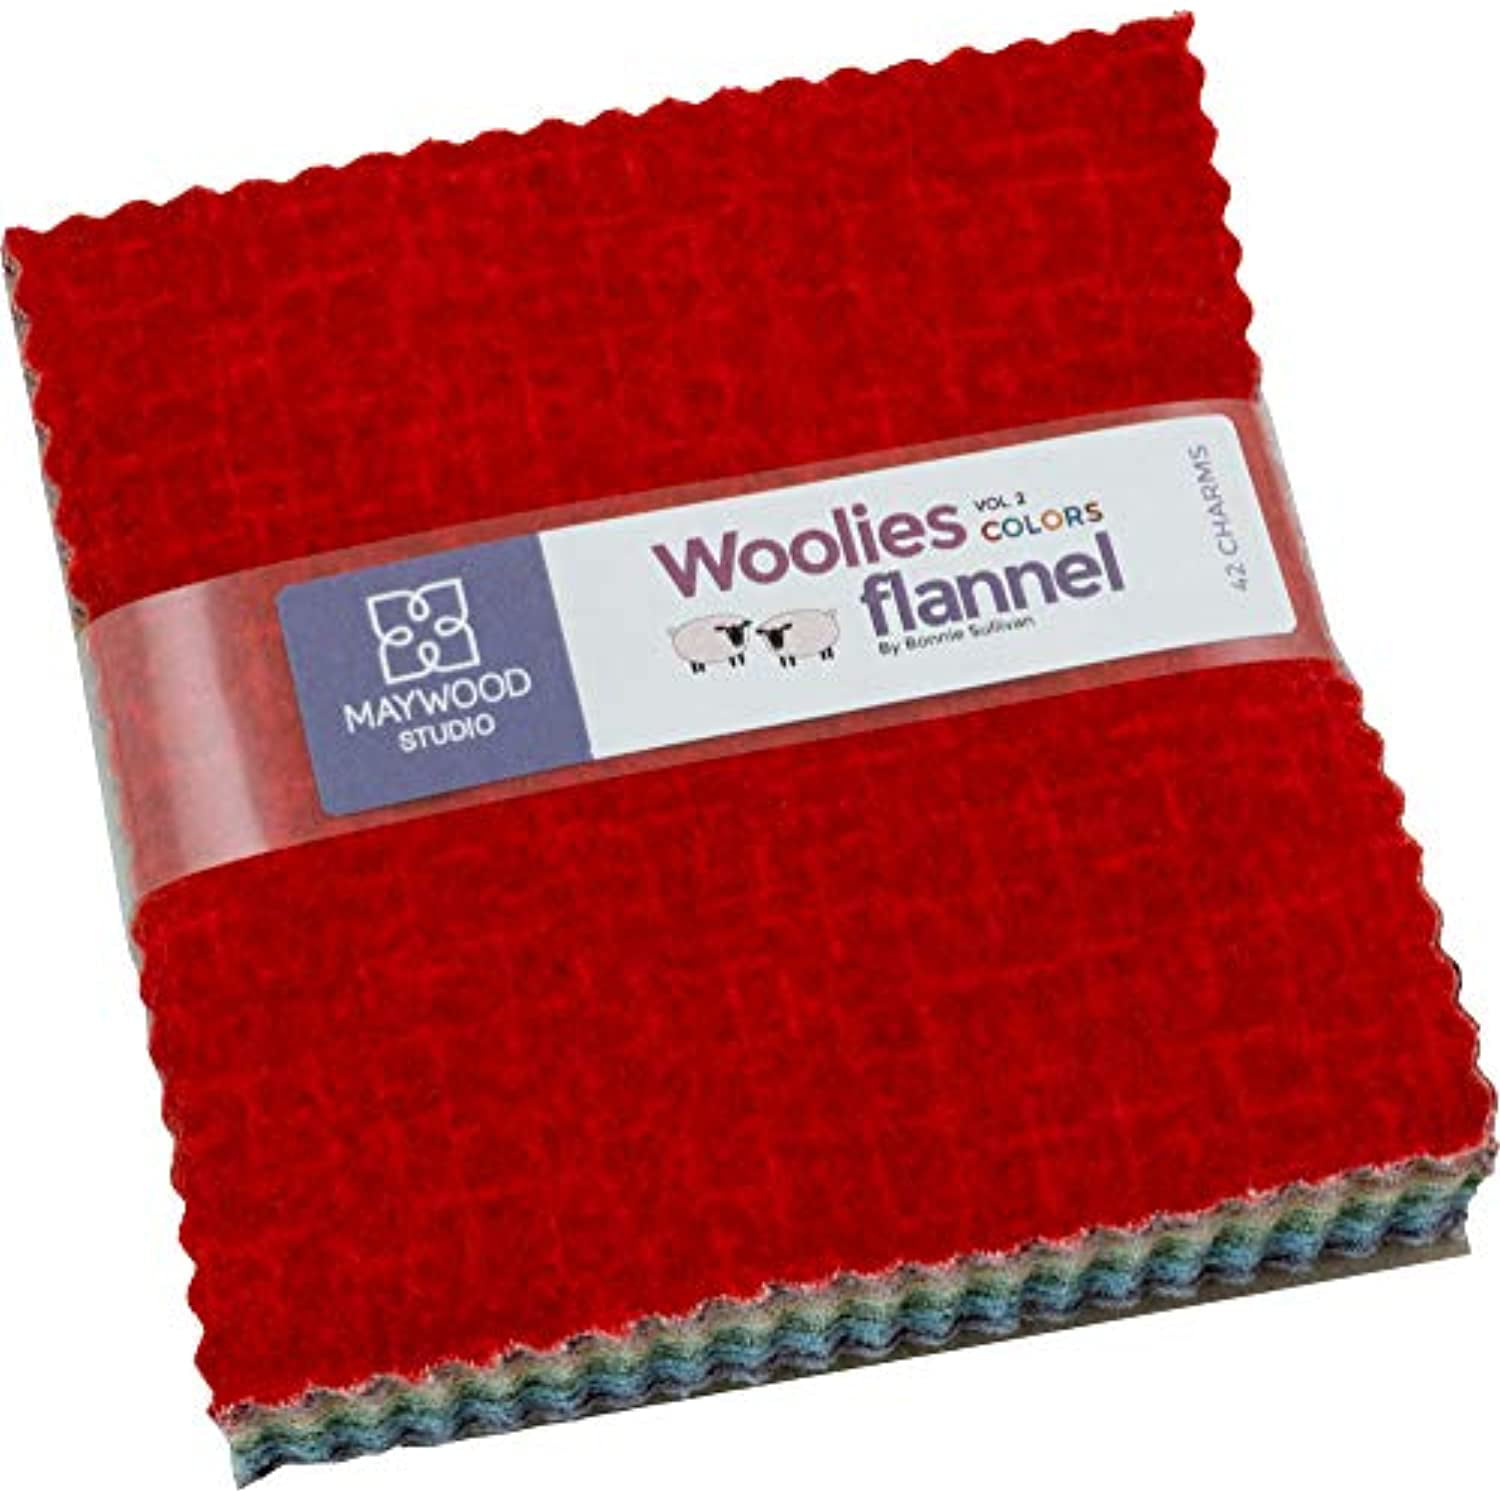 Heritage Woolies Flannel 42-10 x 10 Squares by Bonnie Sullivan for Maywood Studio